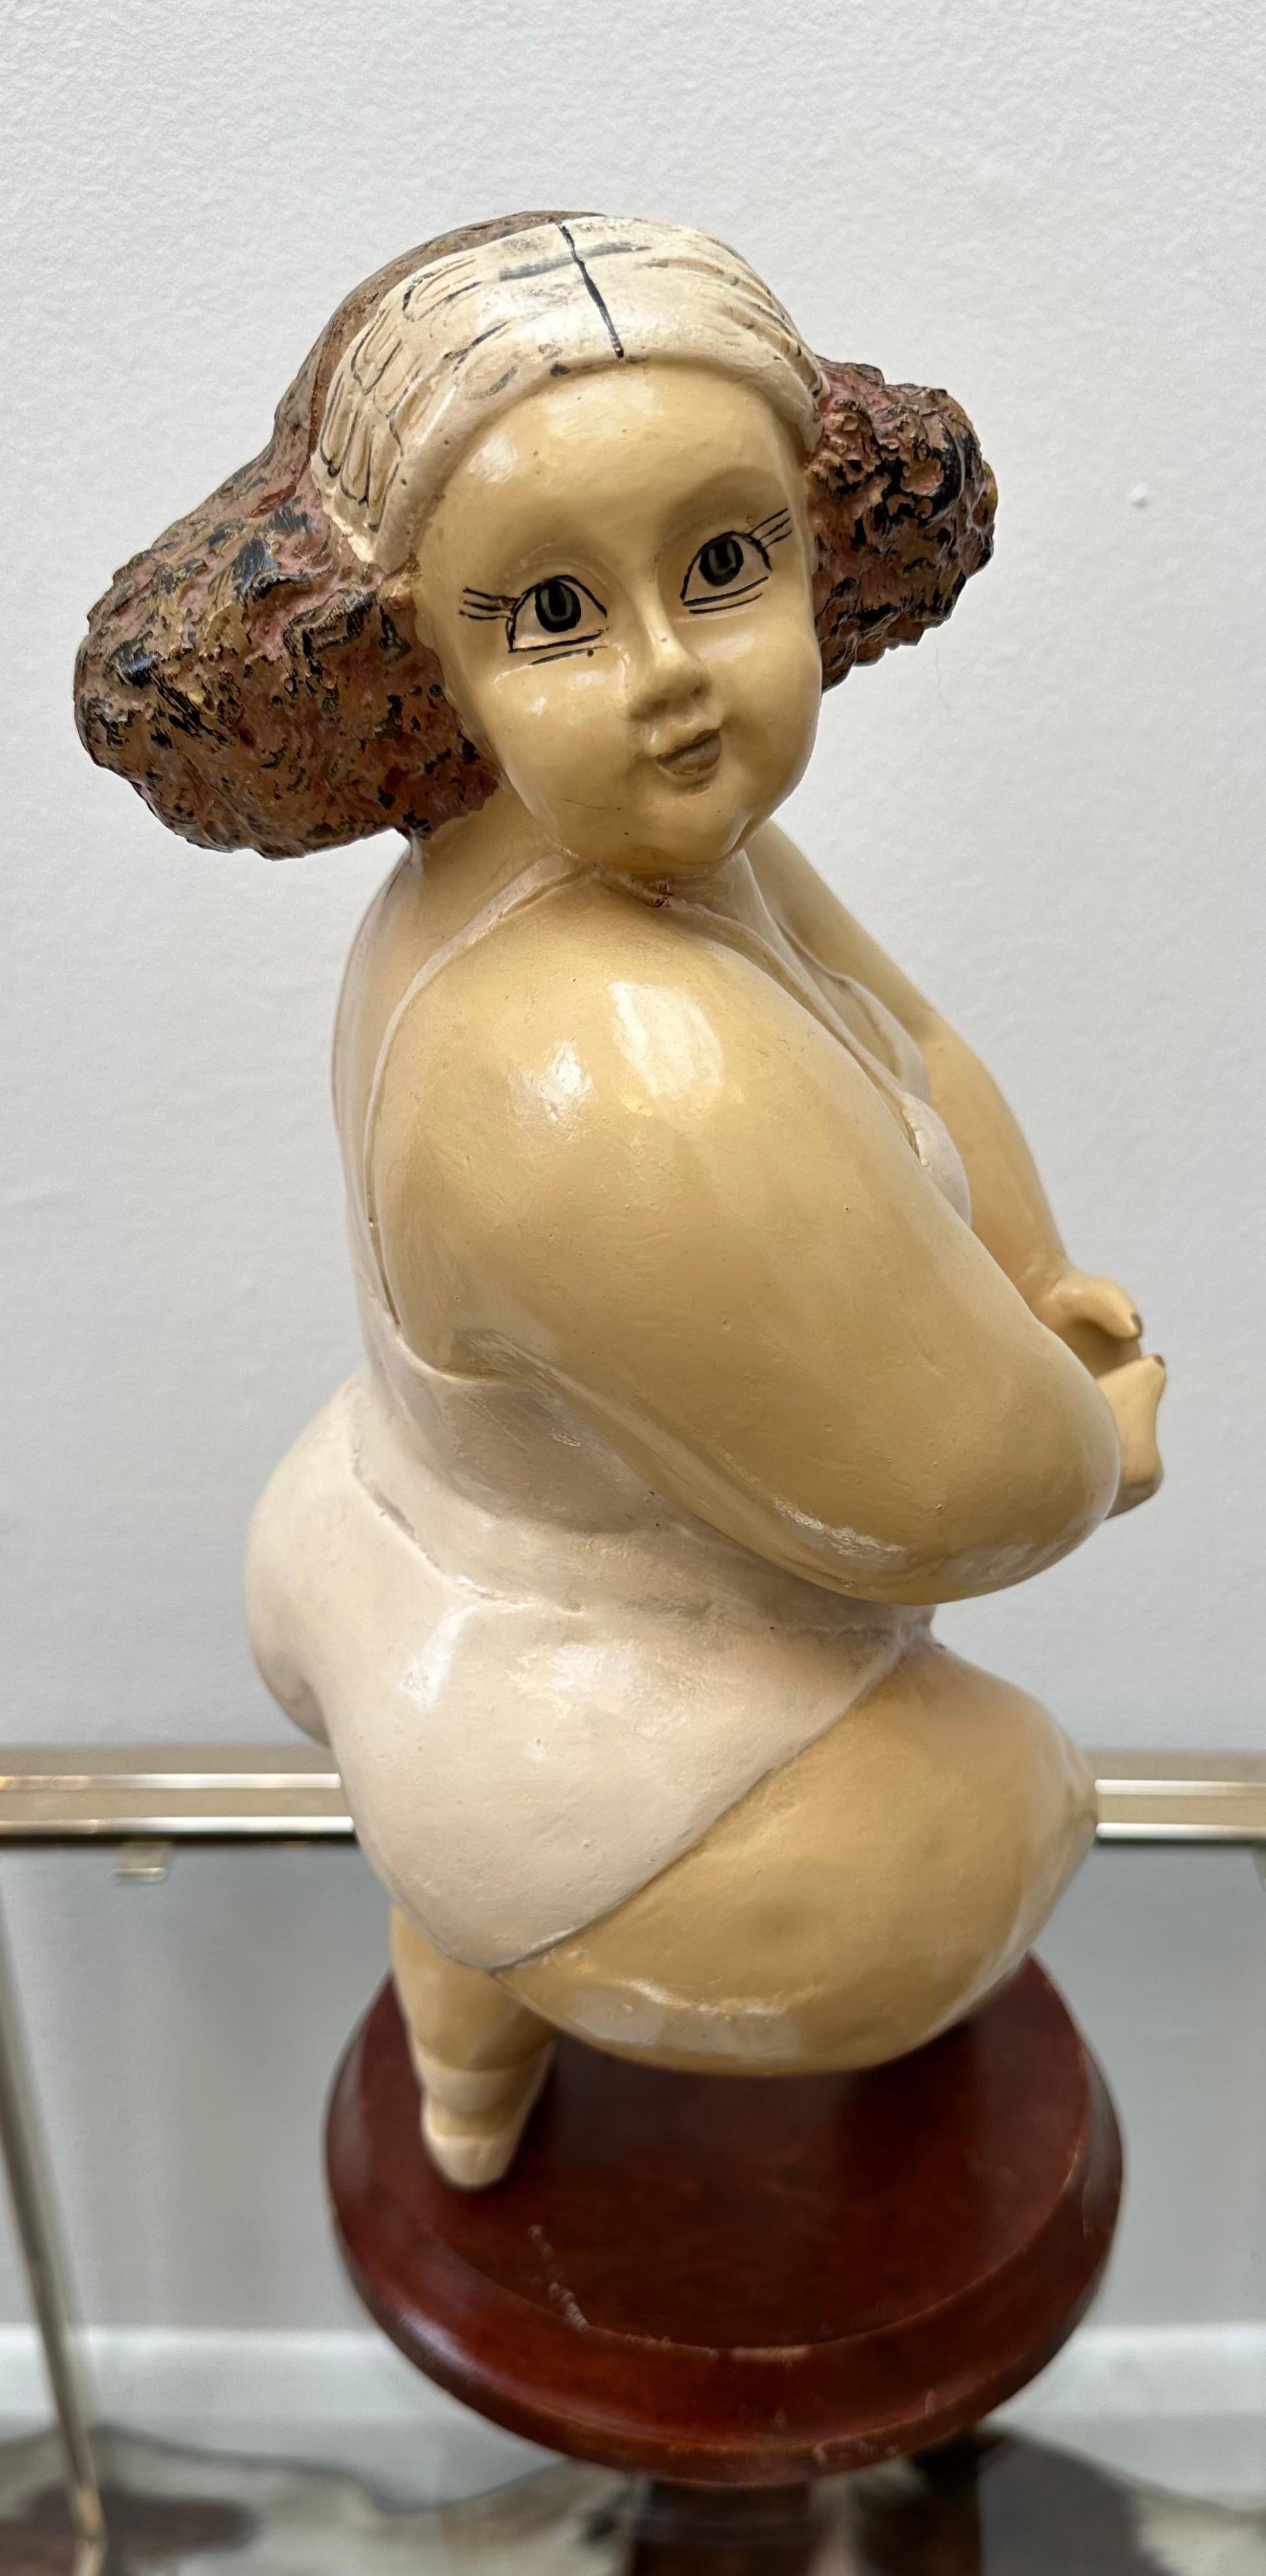 Hand-Crafted Vintage Molded Resin Hand Painted Dancing Ballerina Figurine Botero Style